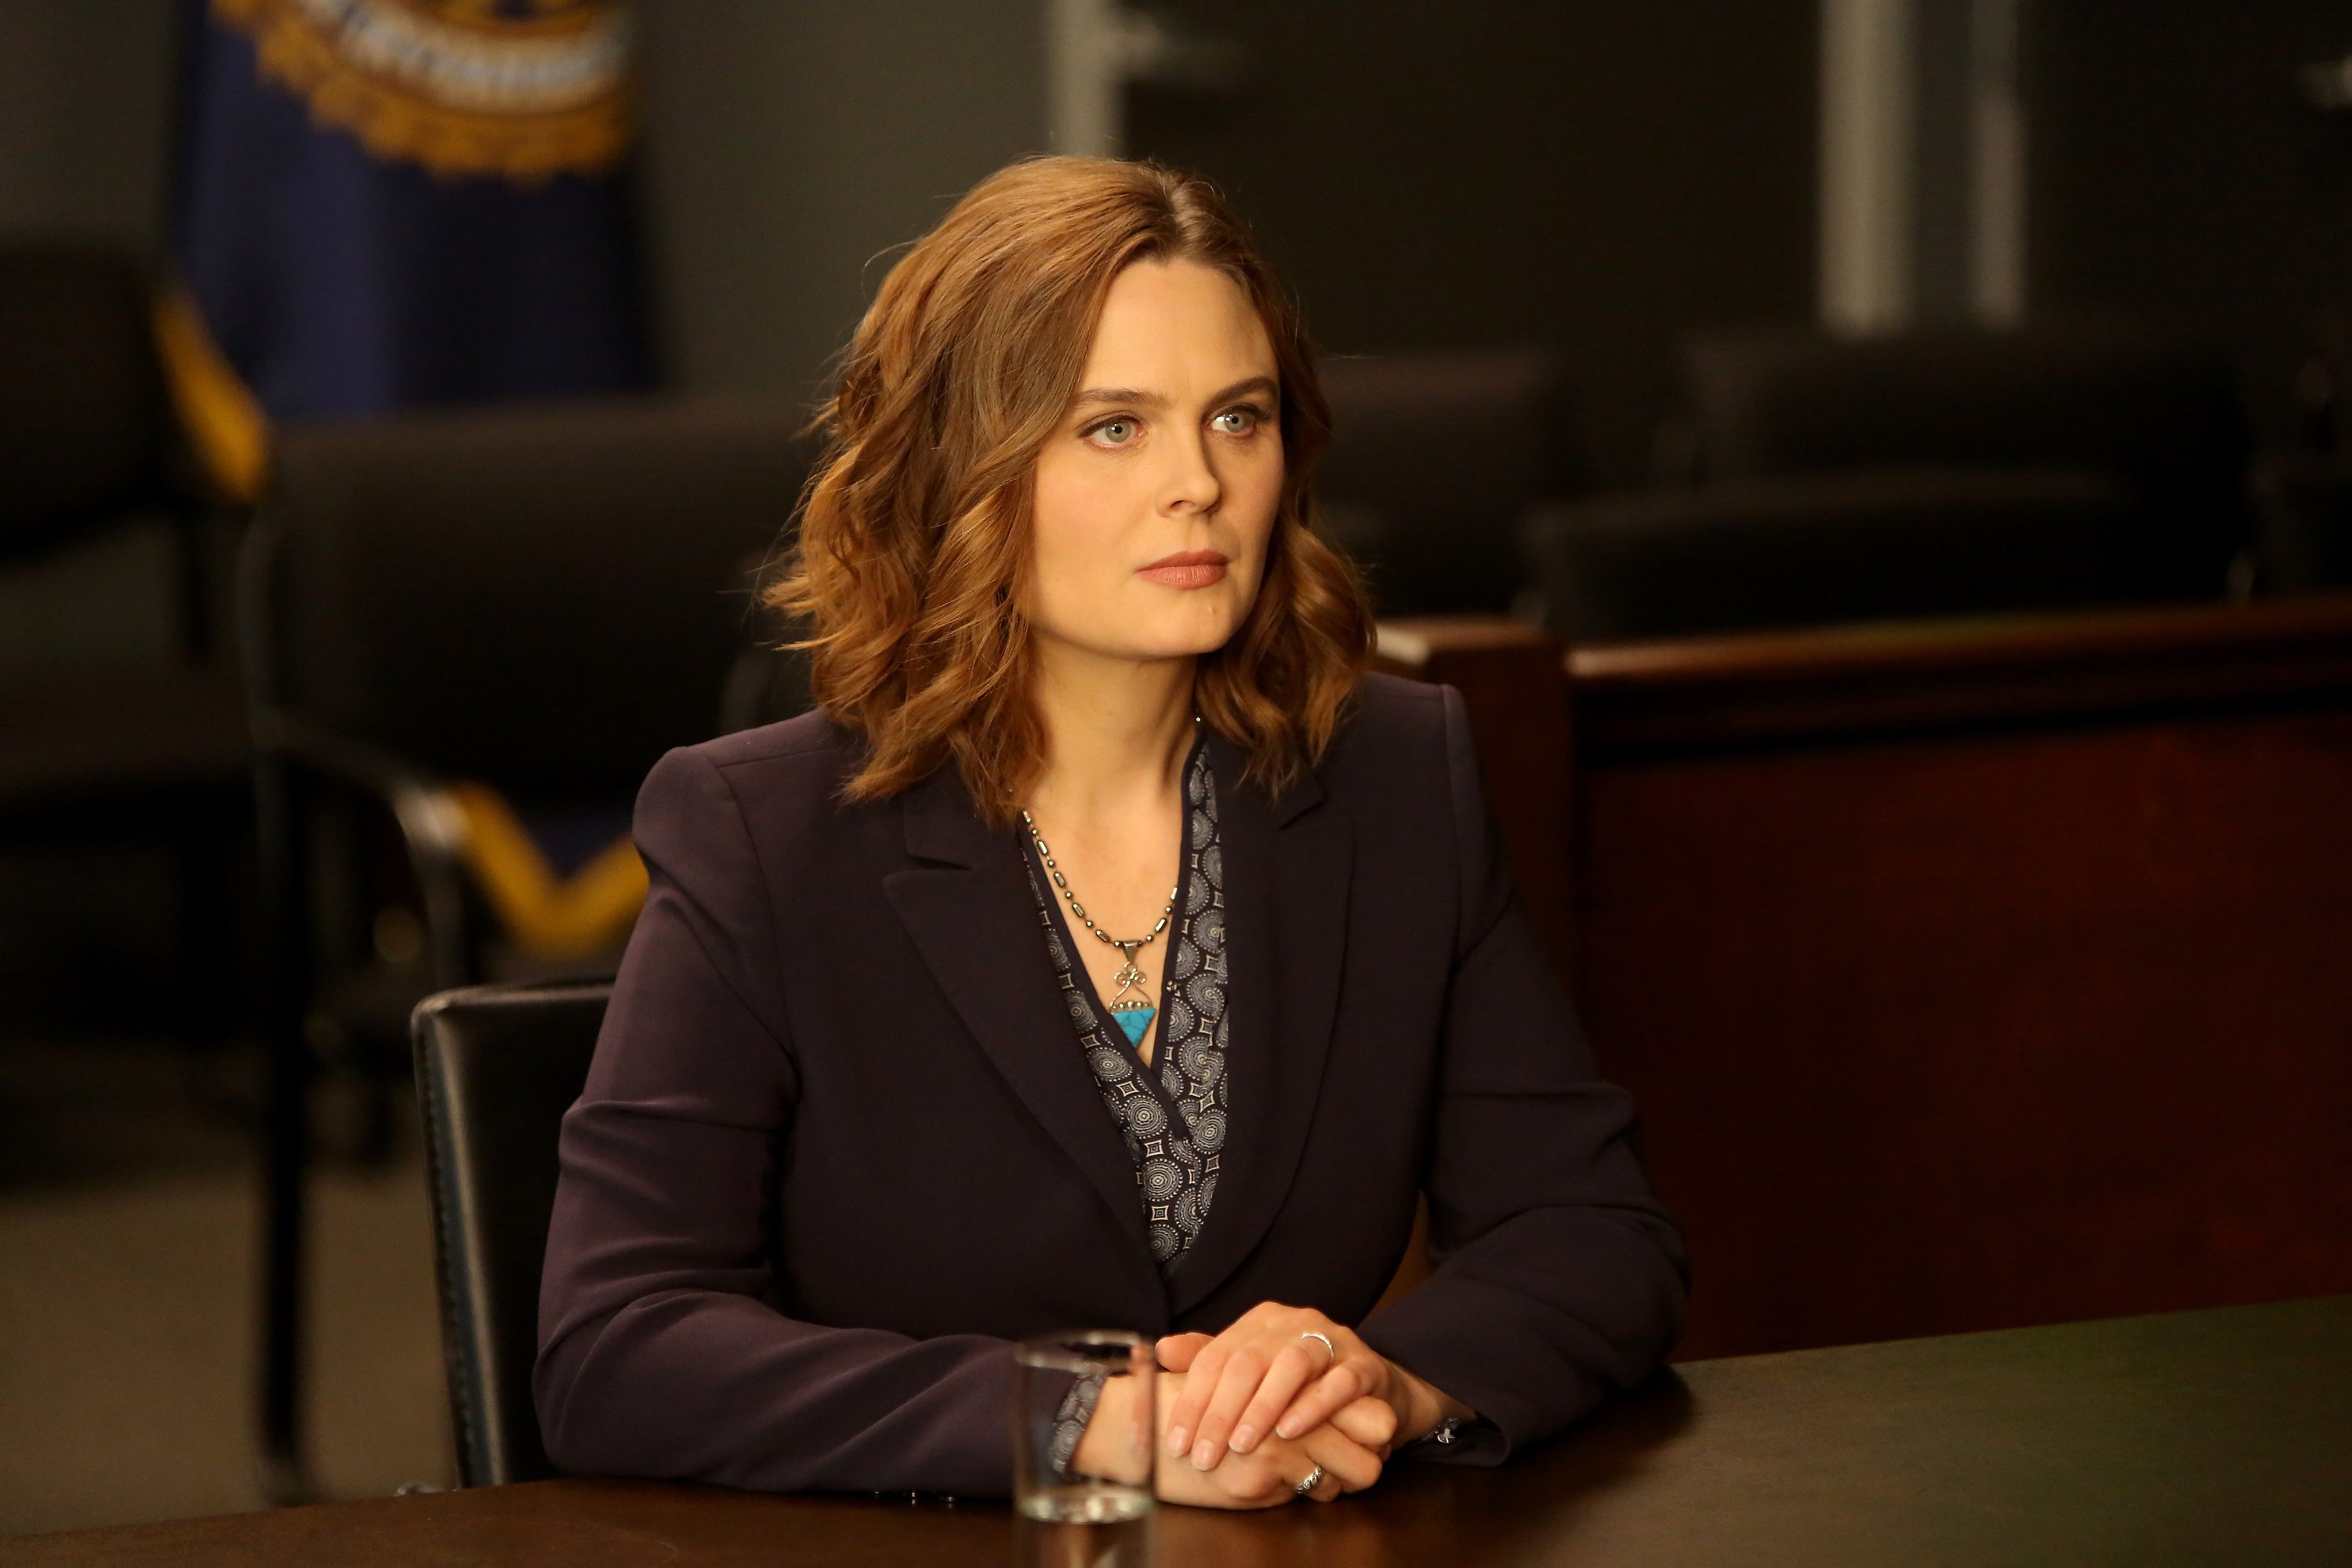 Emily Deschanel in the "The Last Shot at a Second Chance" episode of "BONES" on May 5, 2016. | Source: Getty Images